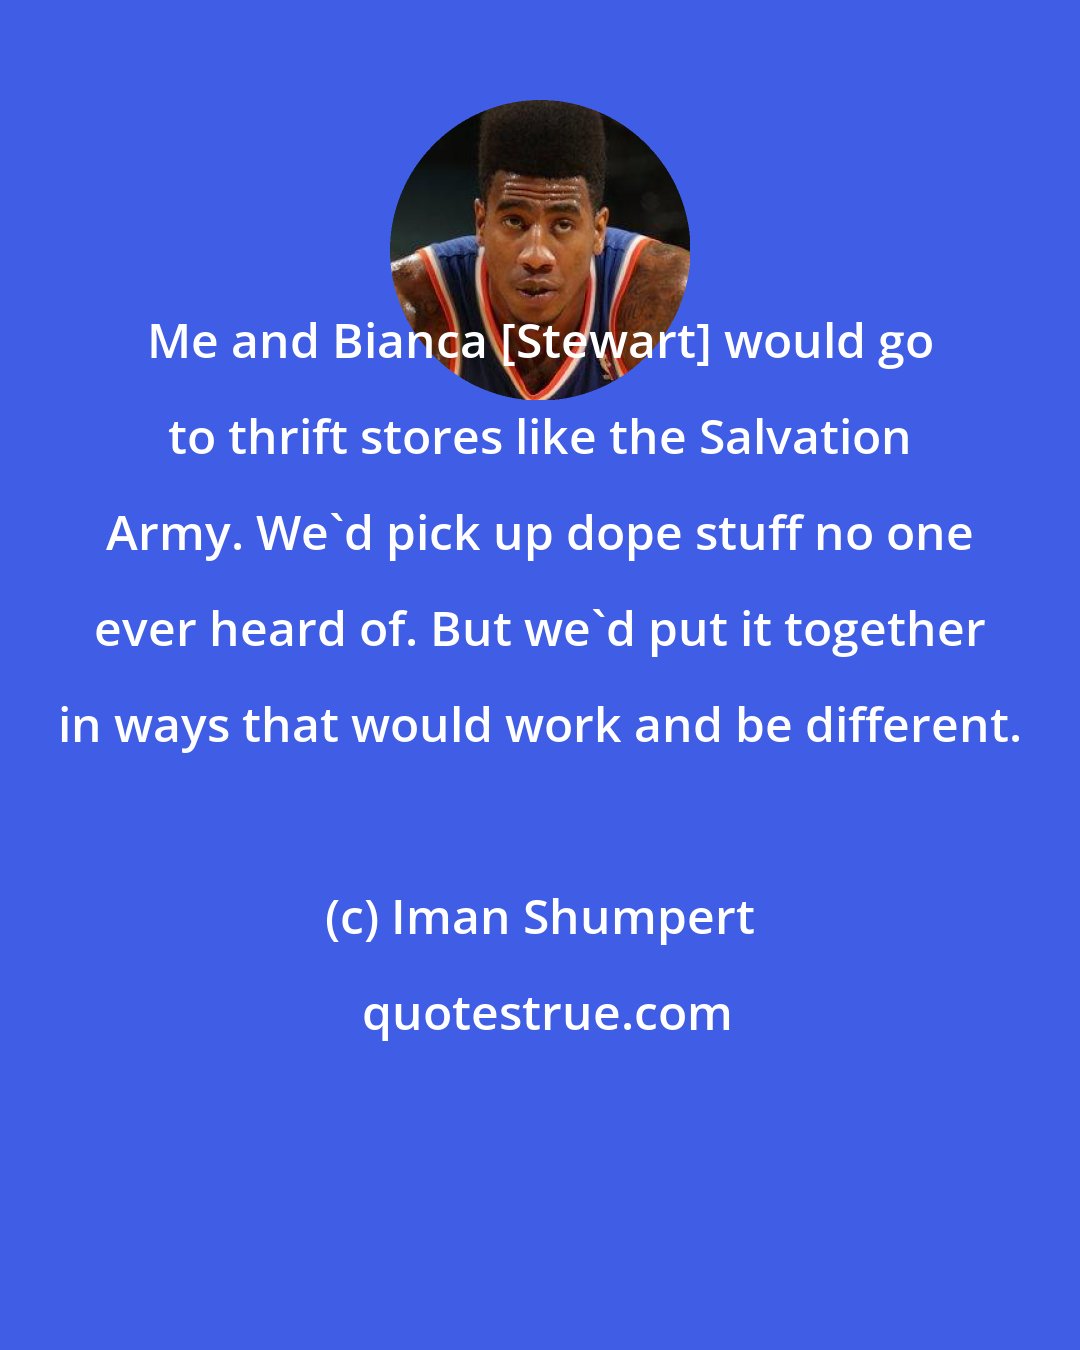 Iman Shumpert: Me and Bianca [Stewart] would go to thrift stores like the Salvation Army. We'd pick up dope stuff no one ever heard of. But we'd put it together in ways that would work and be different.